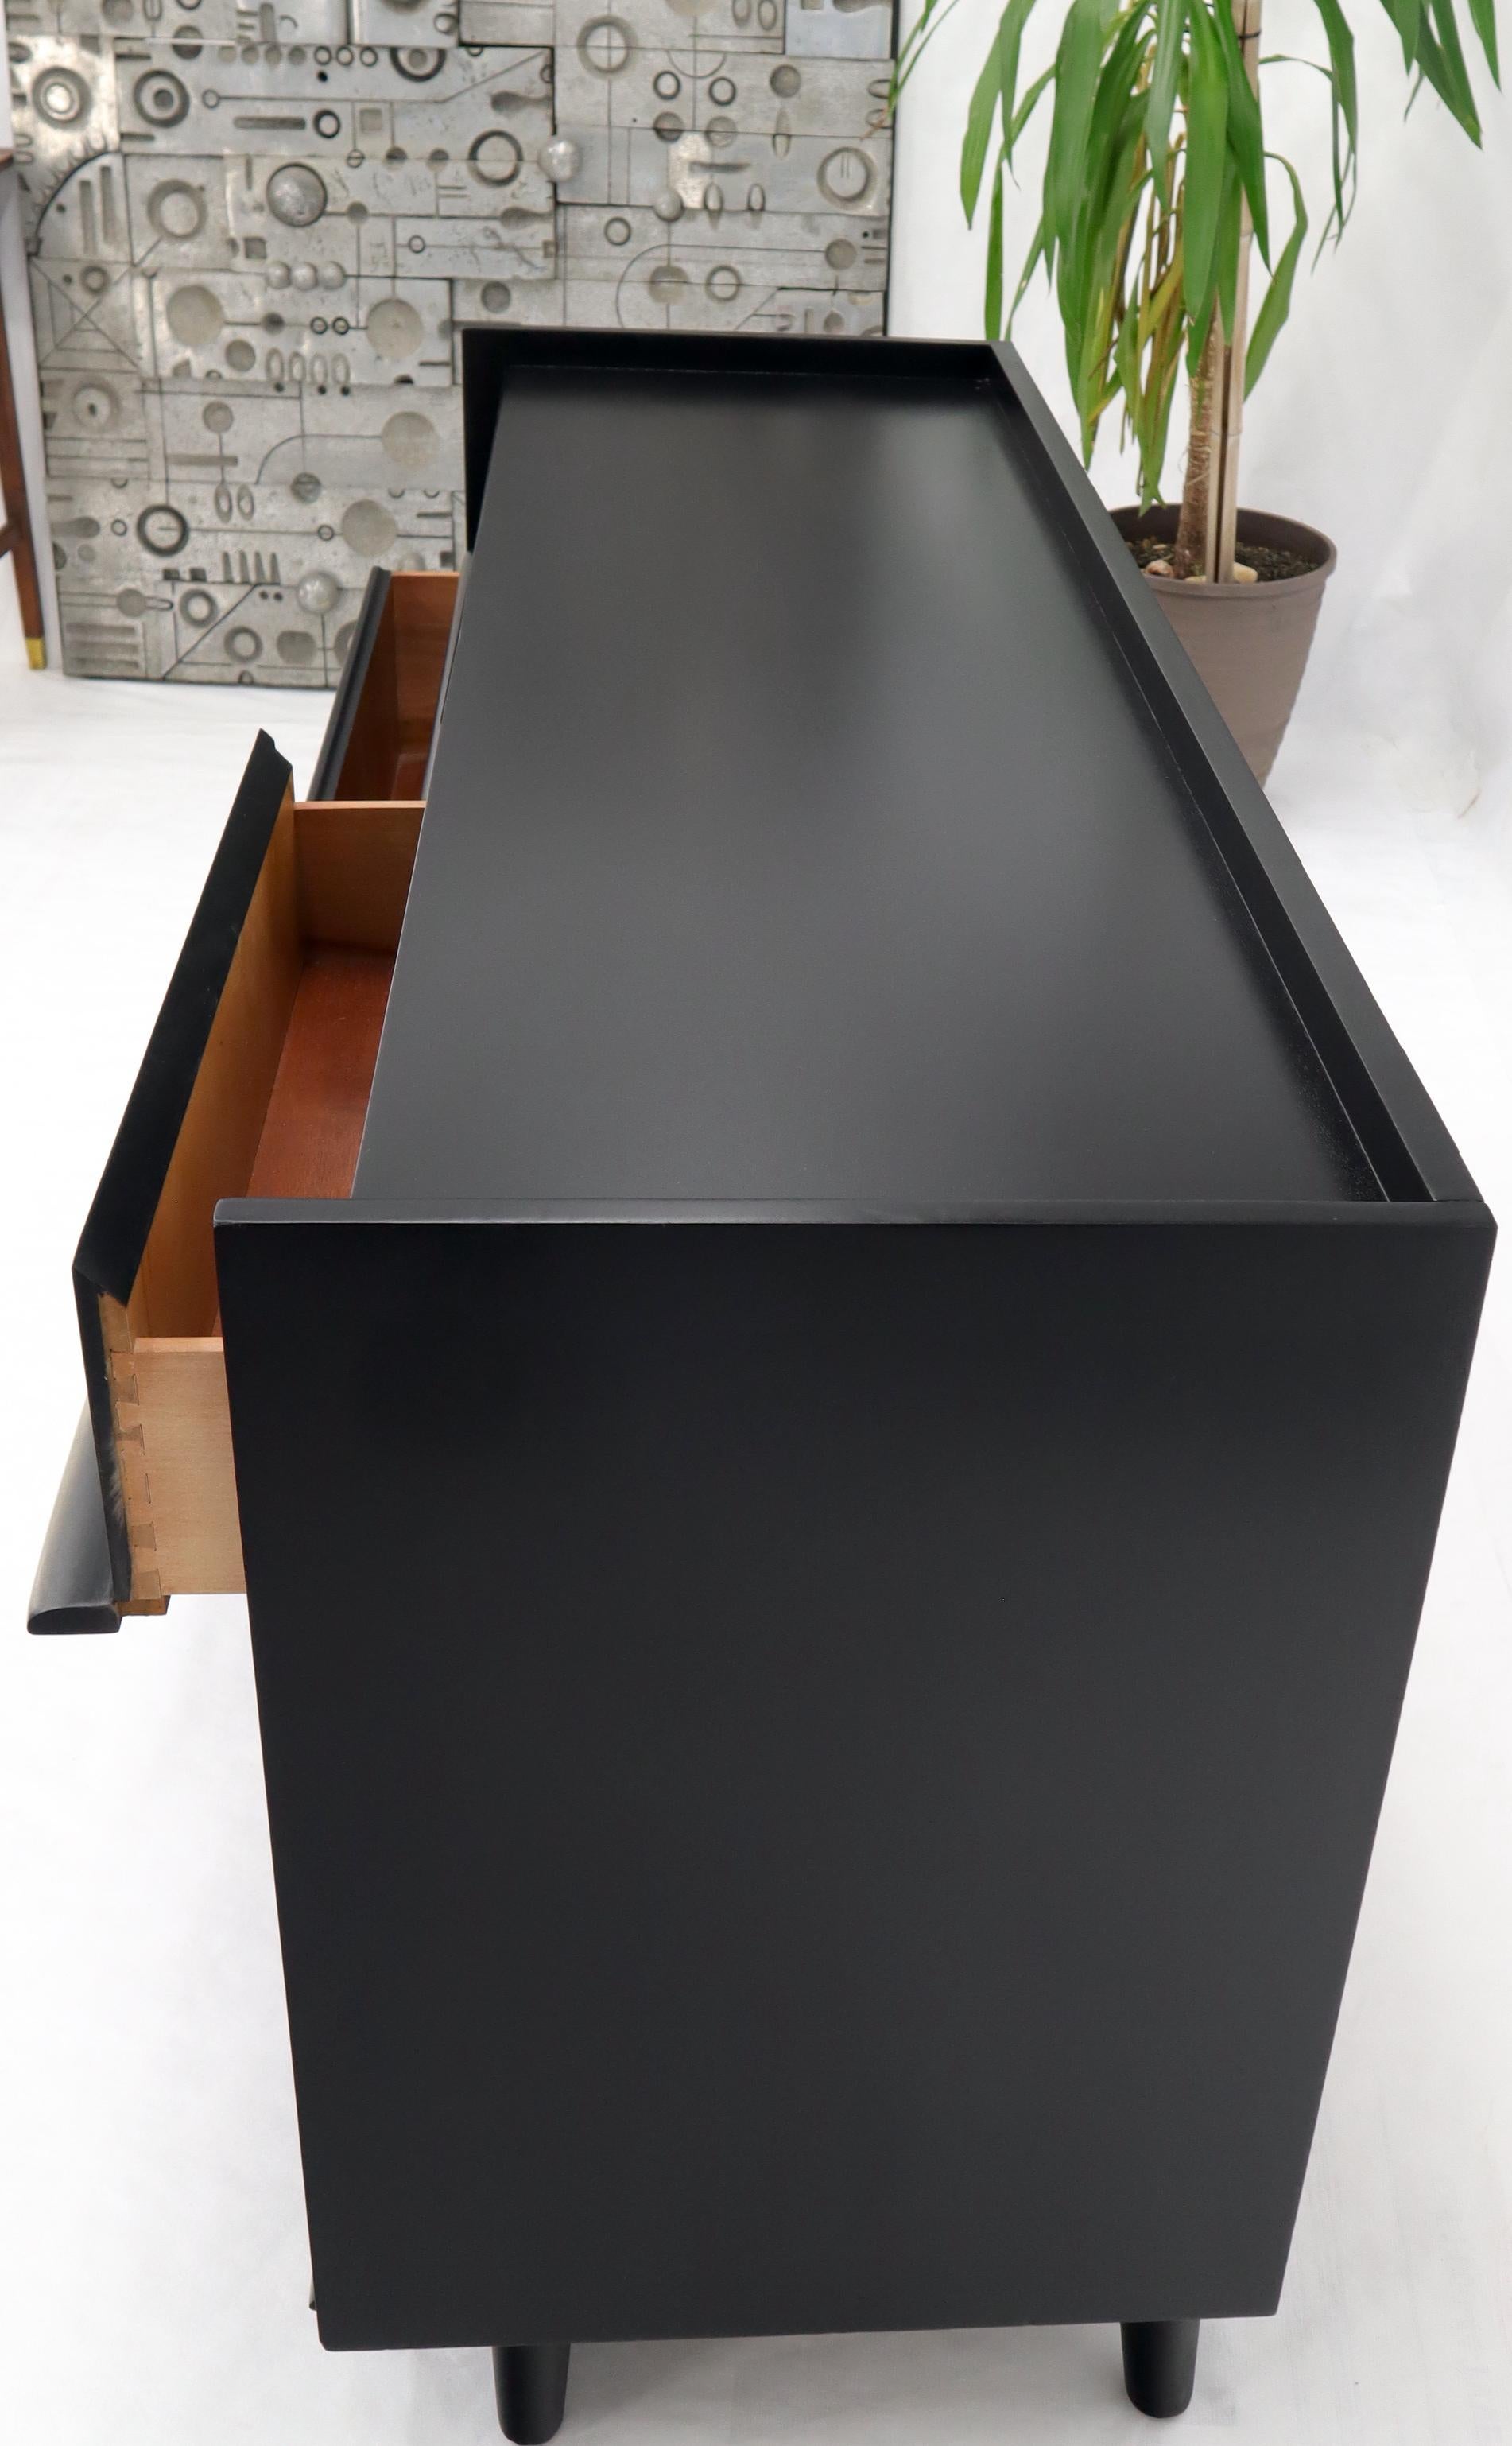 20th Century Black Lacquer Gallery Top Pieced Sculptural Wood Pulls Handles Dresser Credenza